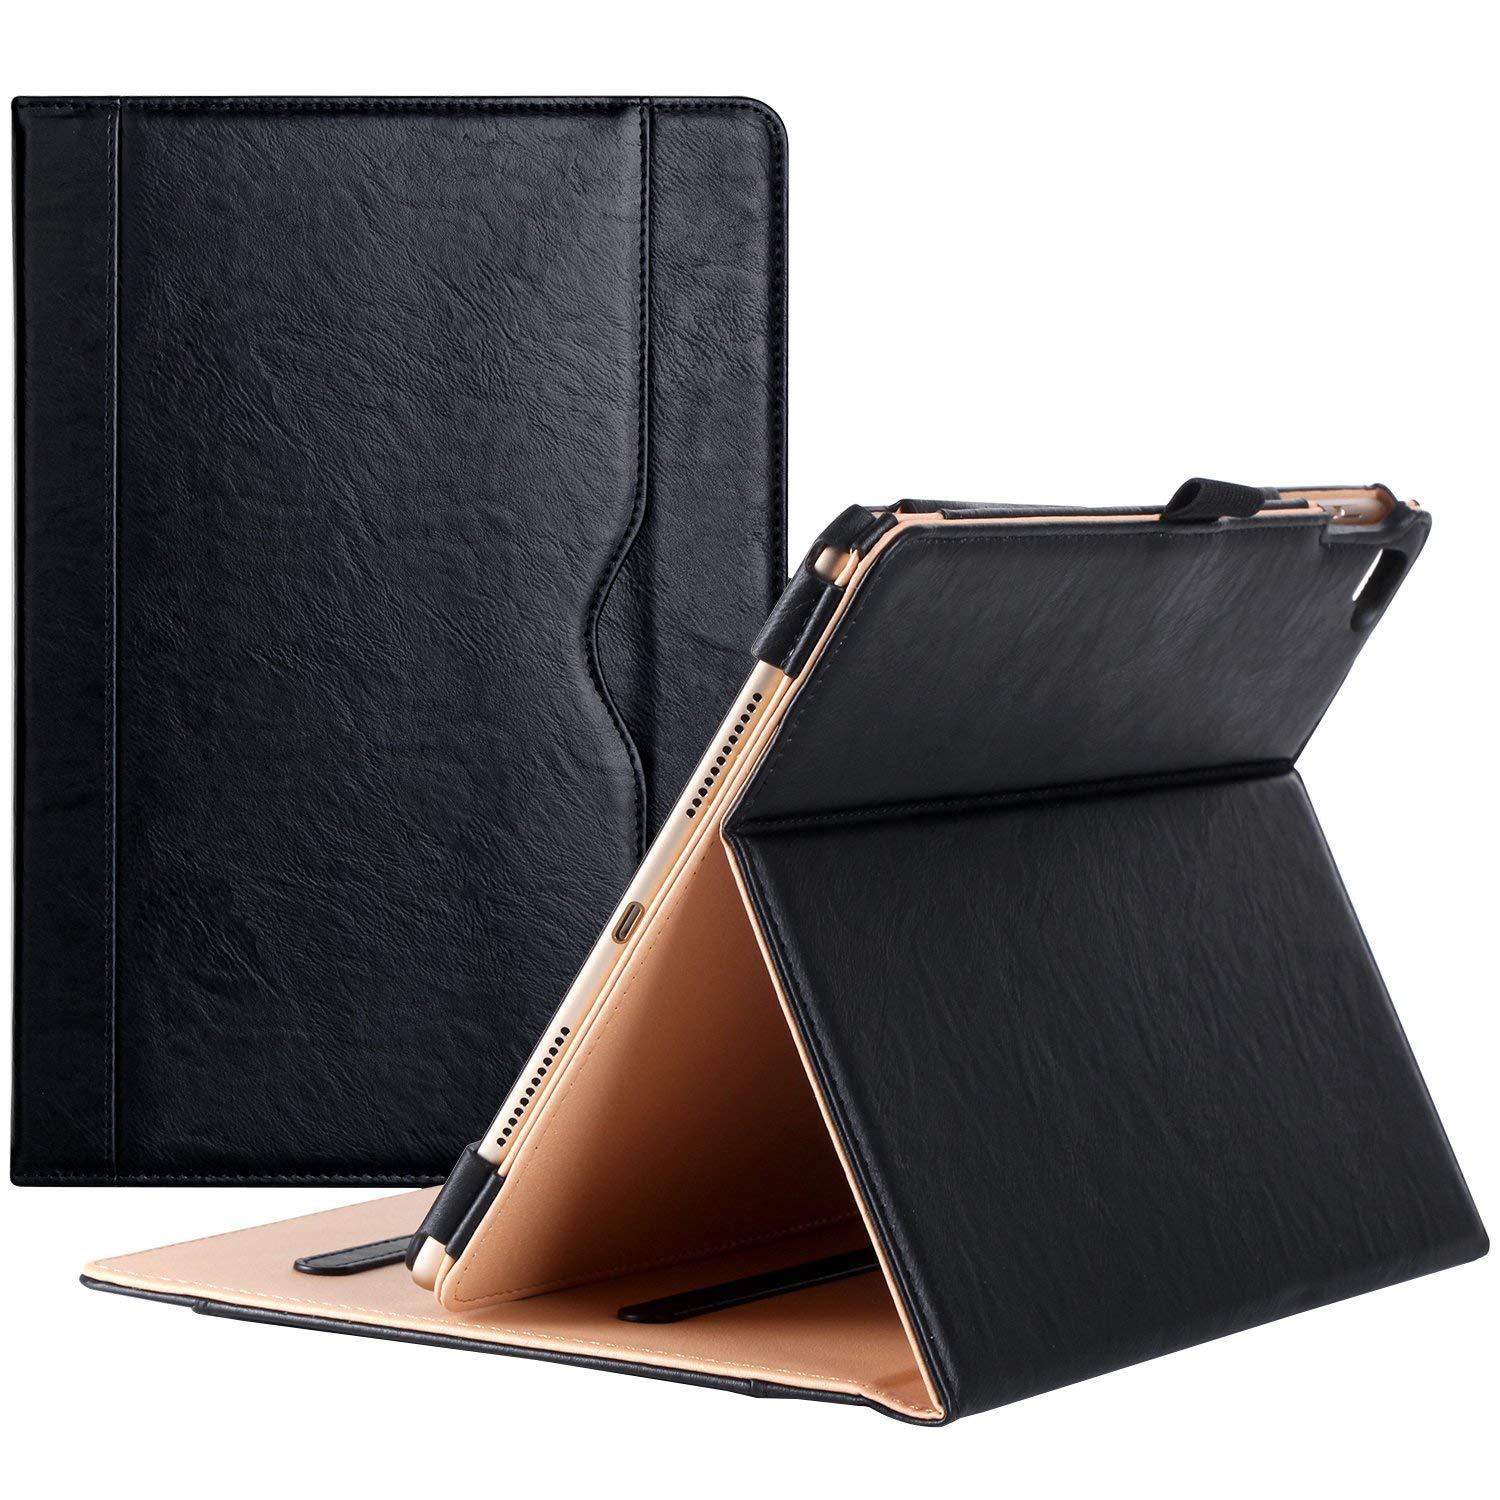 Tablet Case For Apple iPad Pro 9.7 inch 2016 Cover Book Style Stand Card ID  Slot